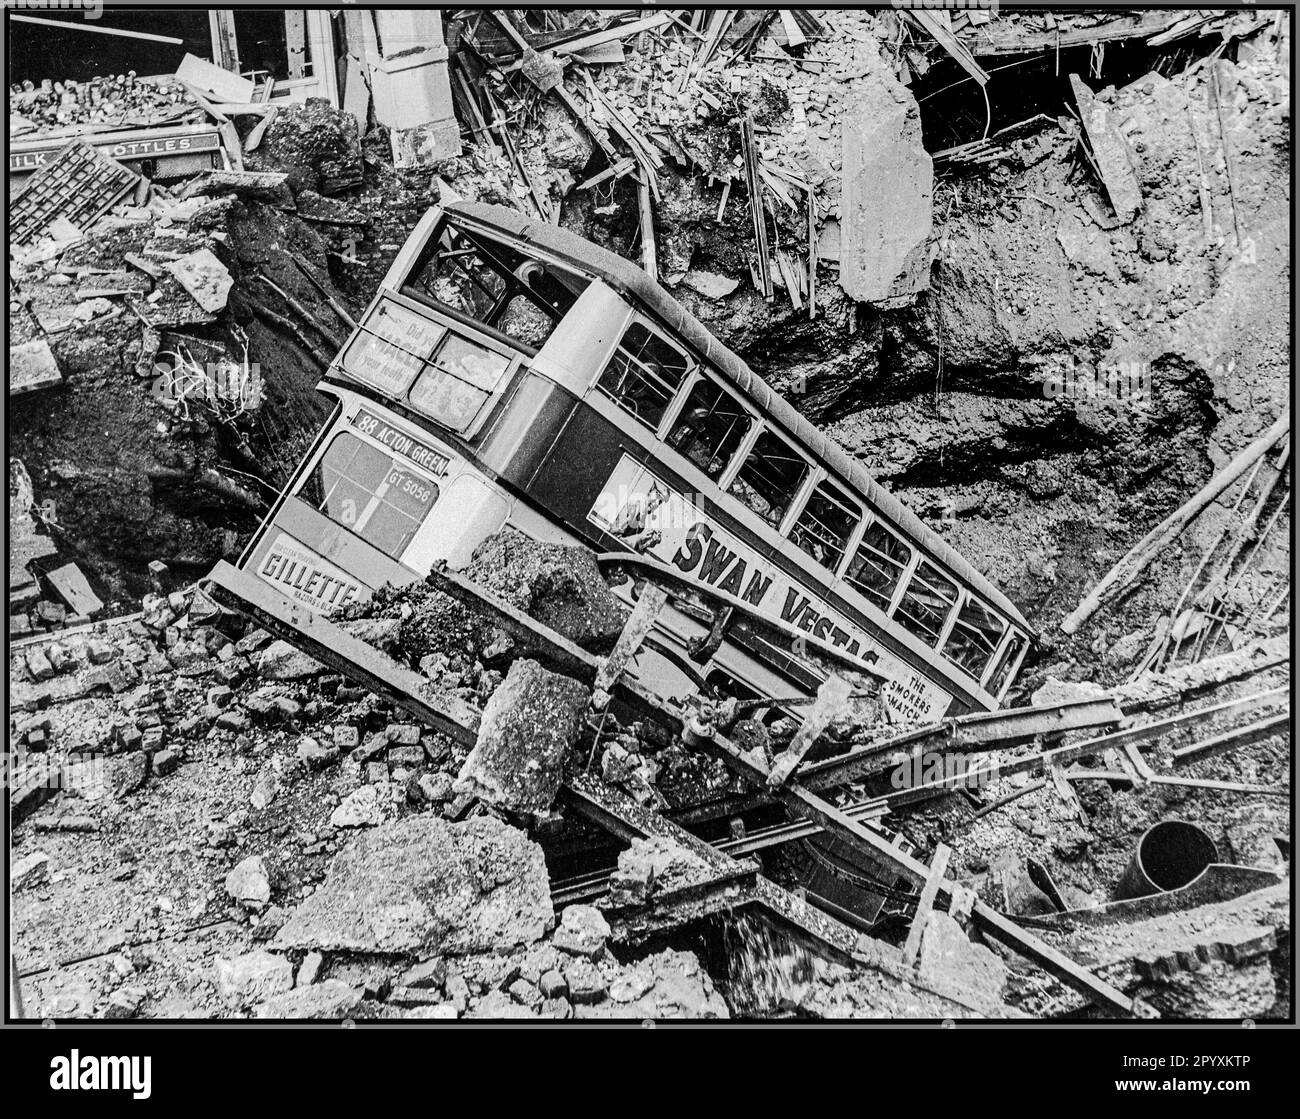 WW2 The London Blitz with a London bus in a bomb crater after a terror bombing blitz by Nazi Germany. The aftermath of a bombing raid, a bus lies in a crater in Balham, South London. Air Raid Damage in Britain during the Second World War. World War II Stock Photo